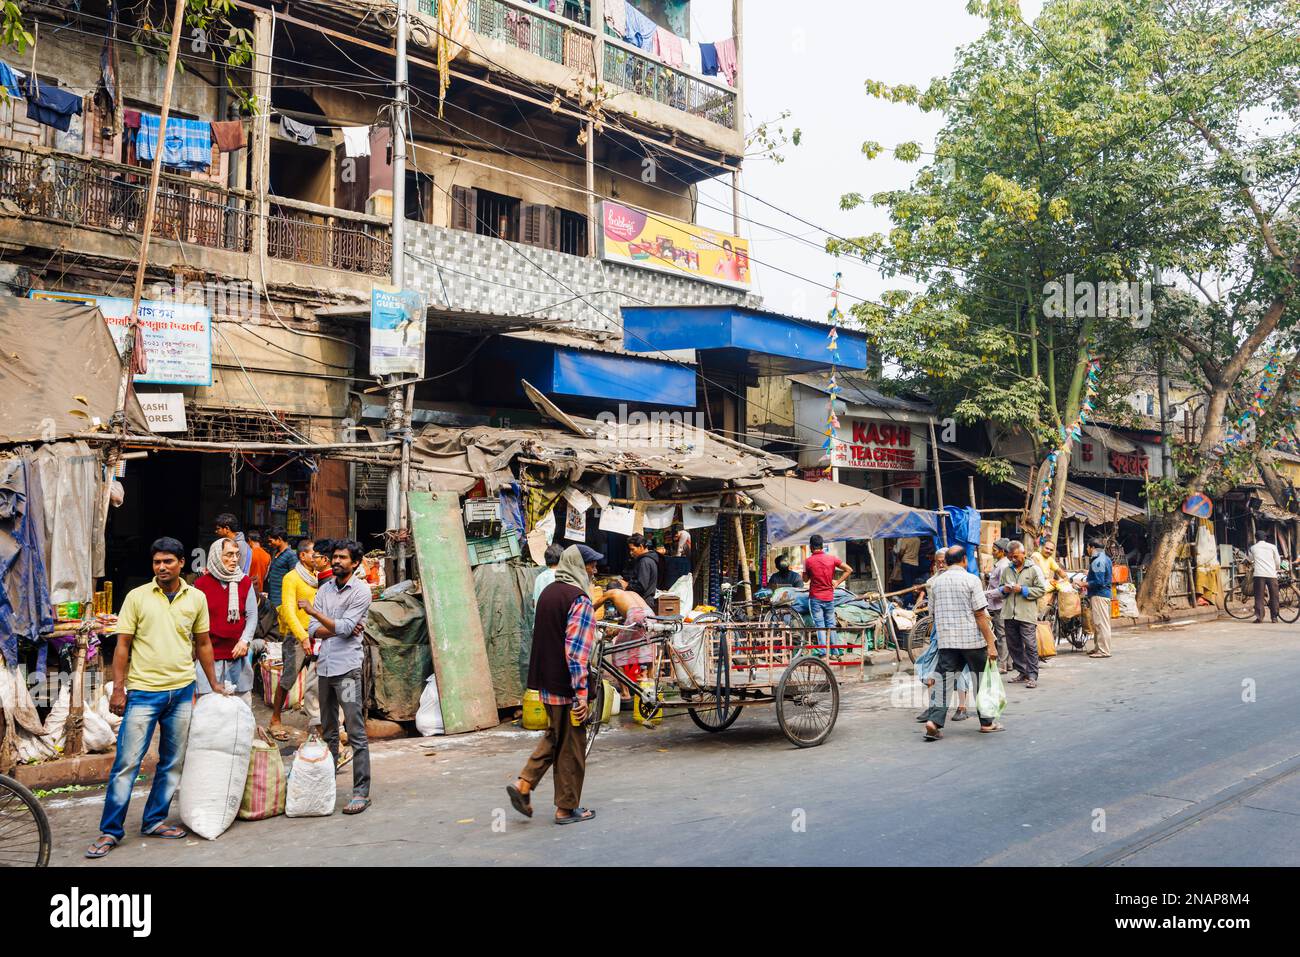 Street scene of roadside shops, stalls and kiosks in the shopping area of in Fariapukur, Shyam Bazar, a suburb of Kolkata, West Bengal, India Stock Photo